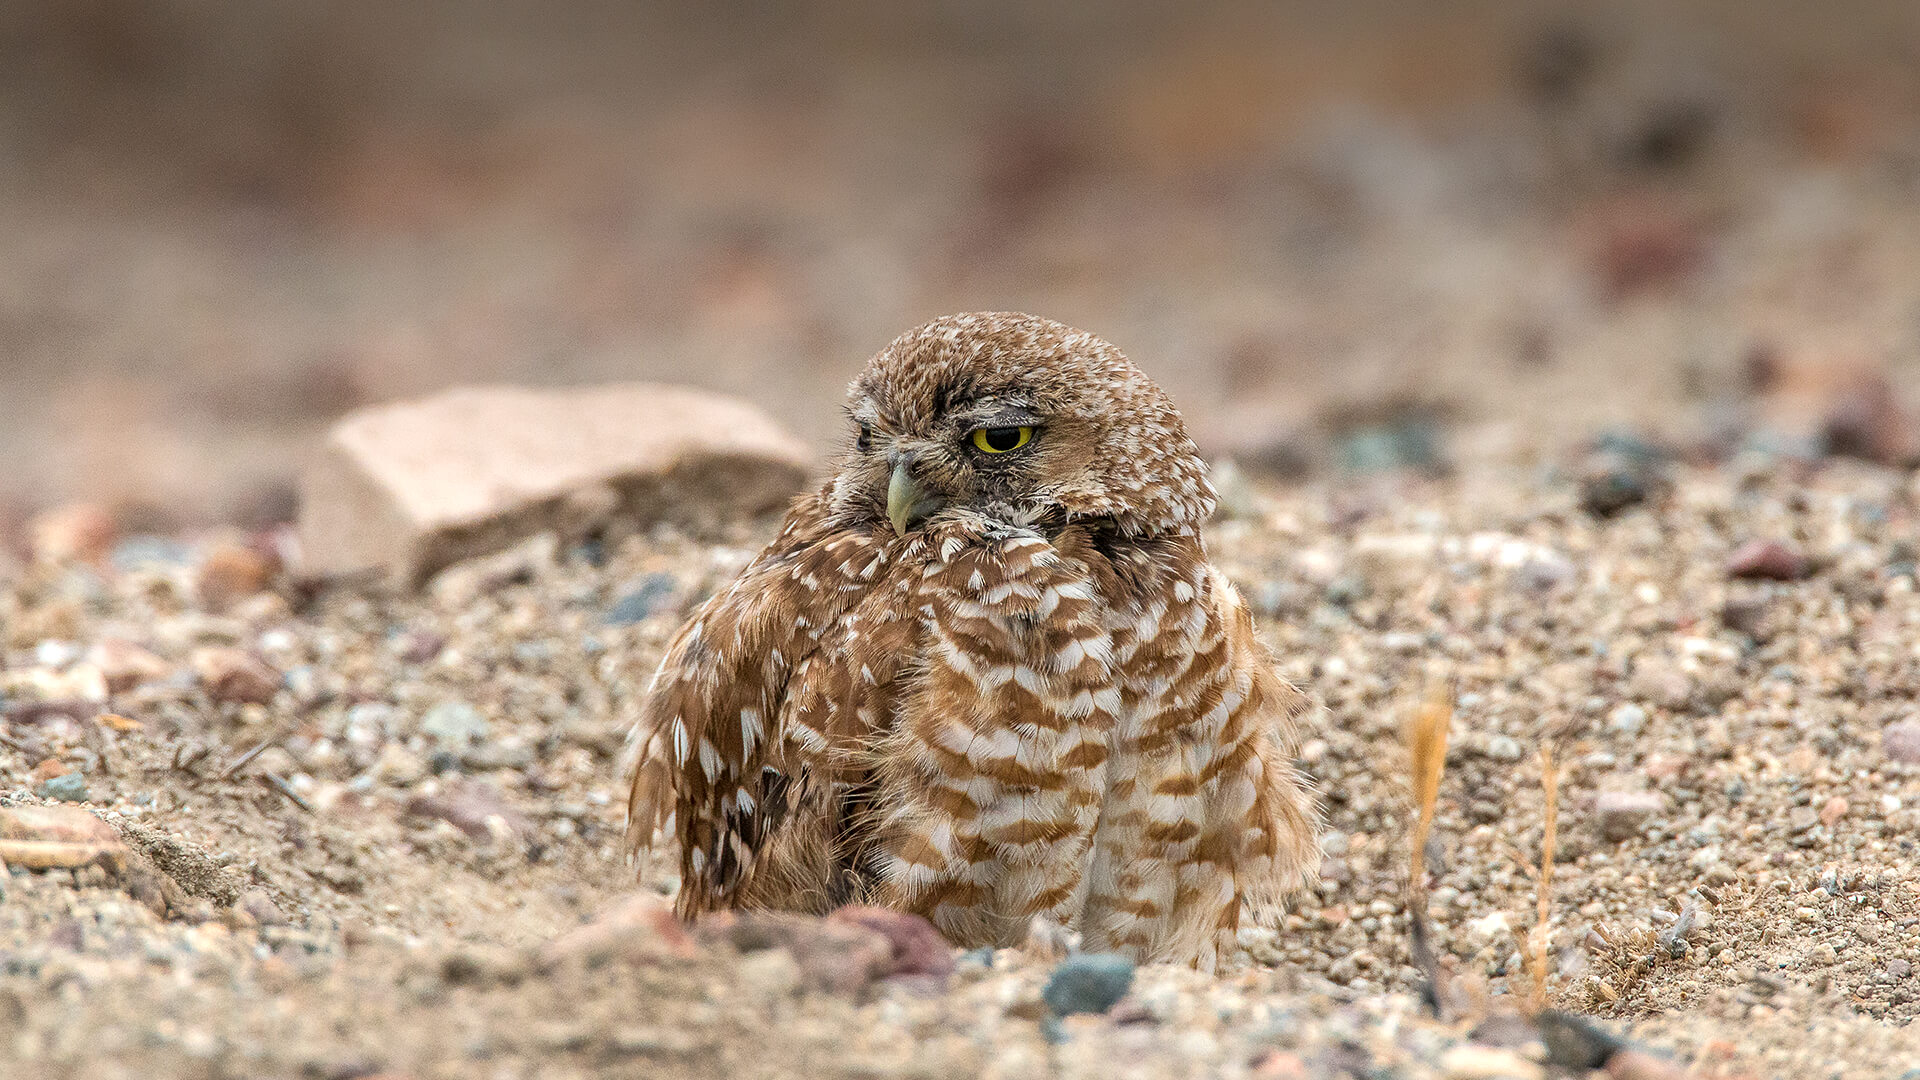 Burrowing owl popped out of its burrow.